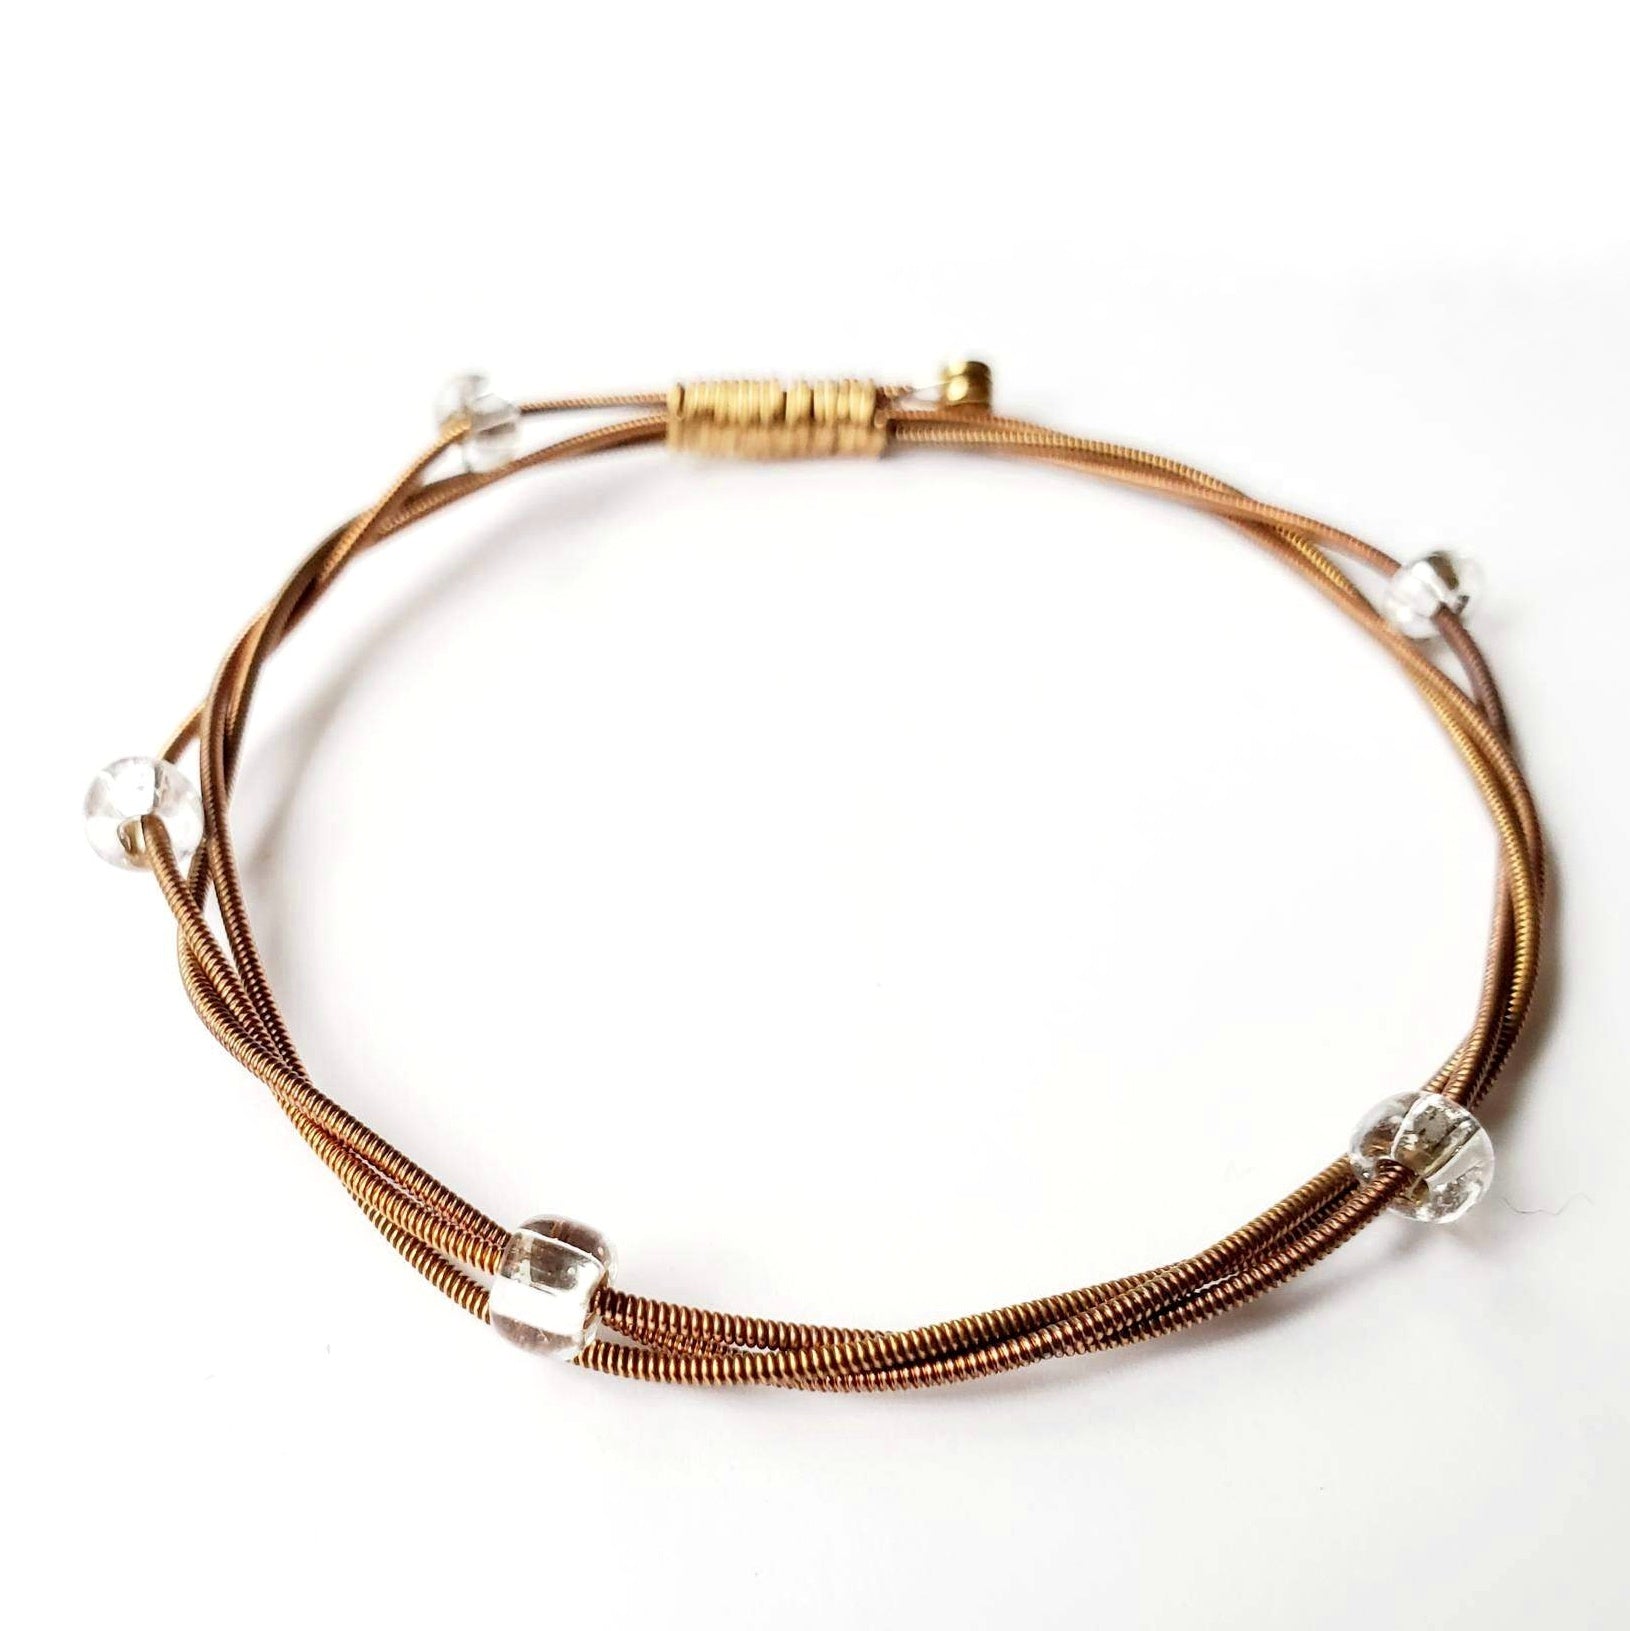 copper coloured bangle style bracelet made from an upcycled guitar string and clear glass beads - white background